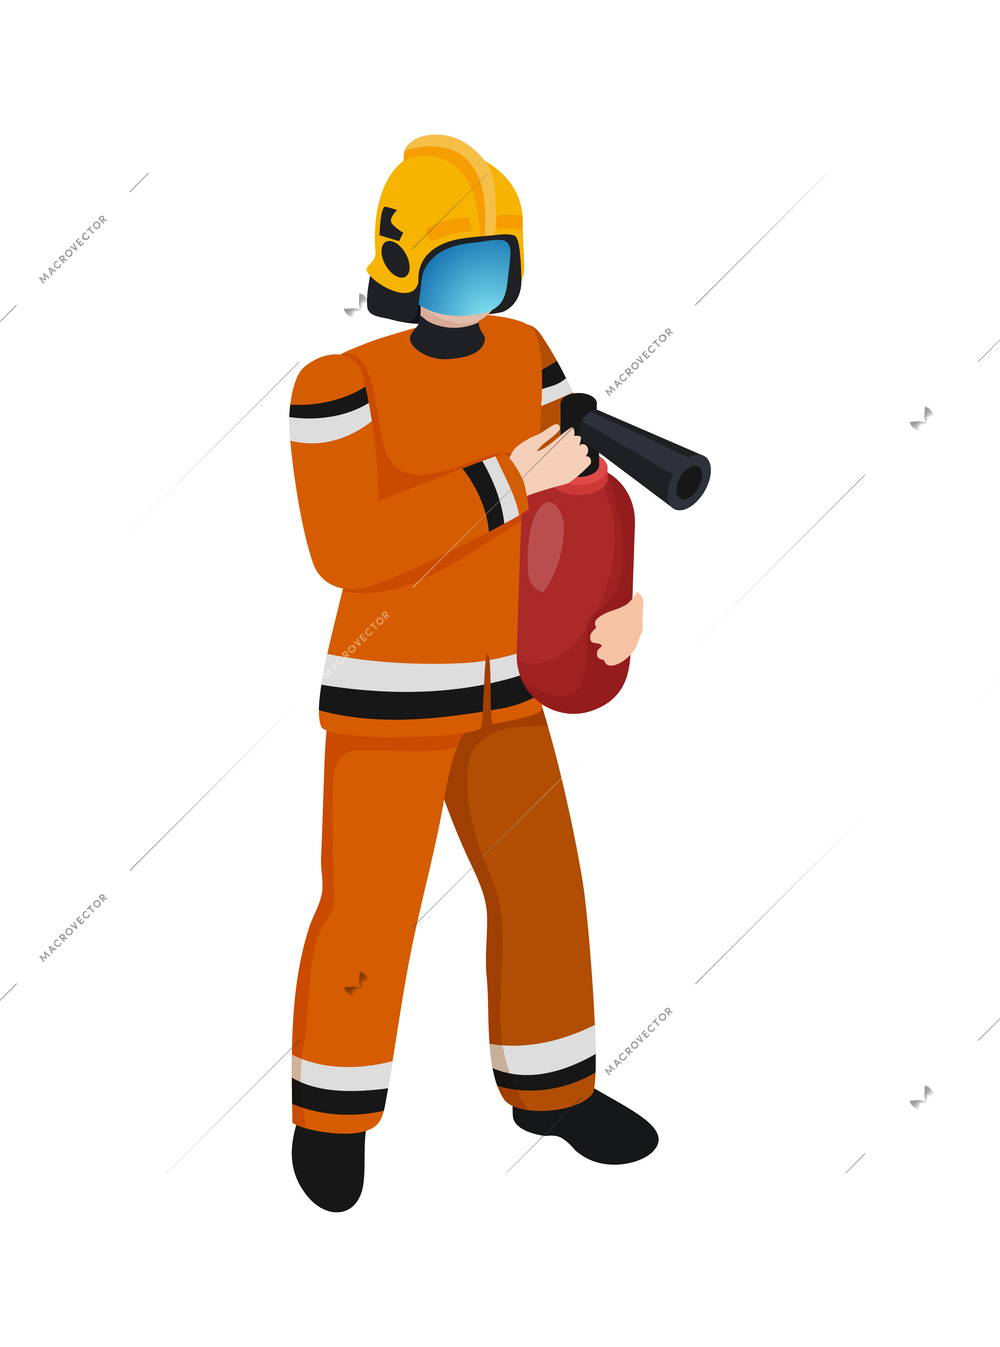 Fireman isometric character with fire extinguisher vector illustration